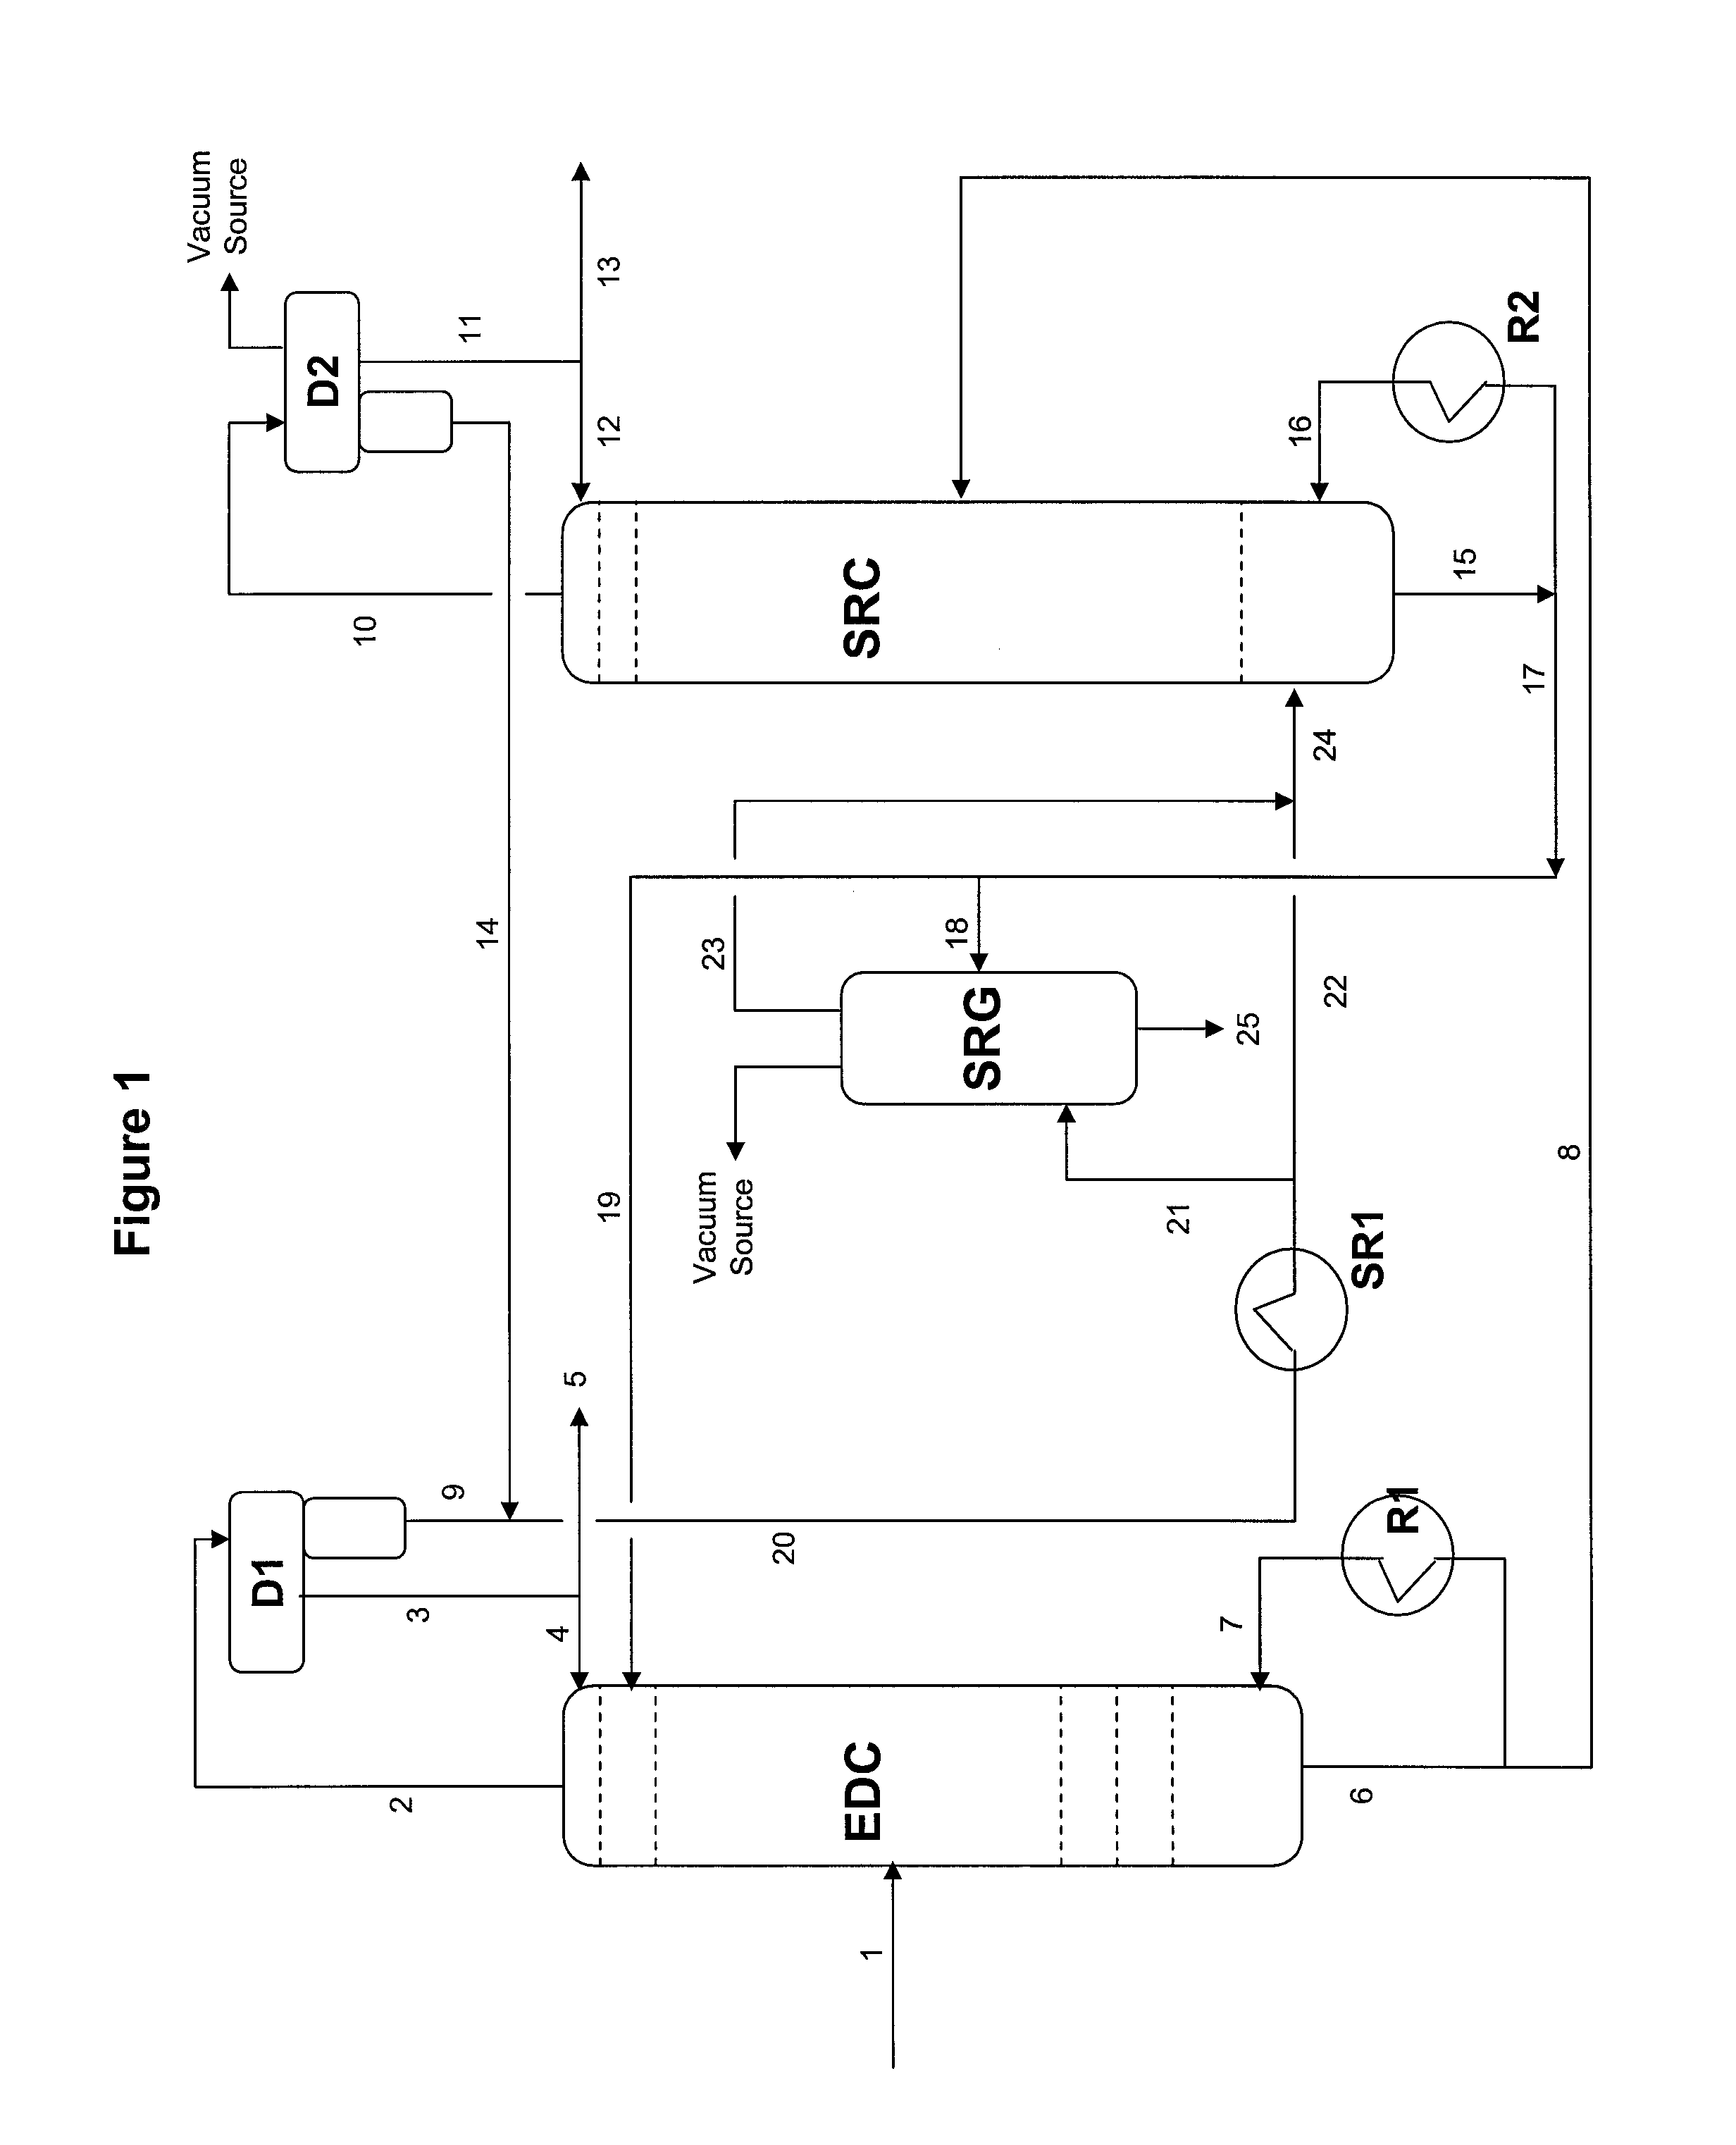 Extractive distillation process for recovering aromatics from petroleum streams